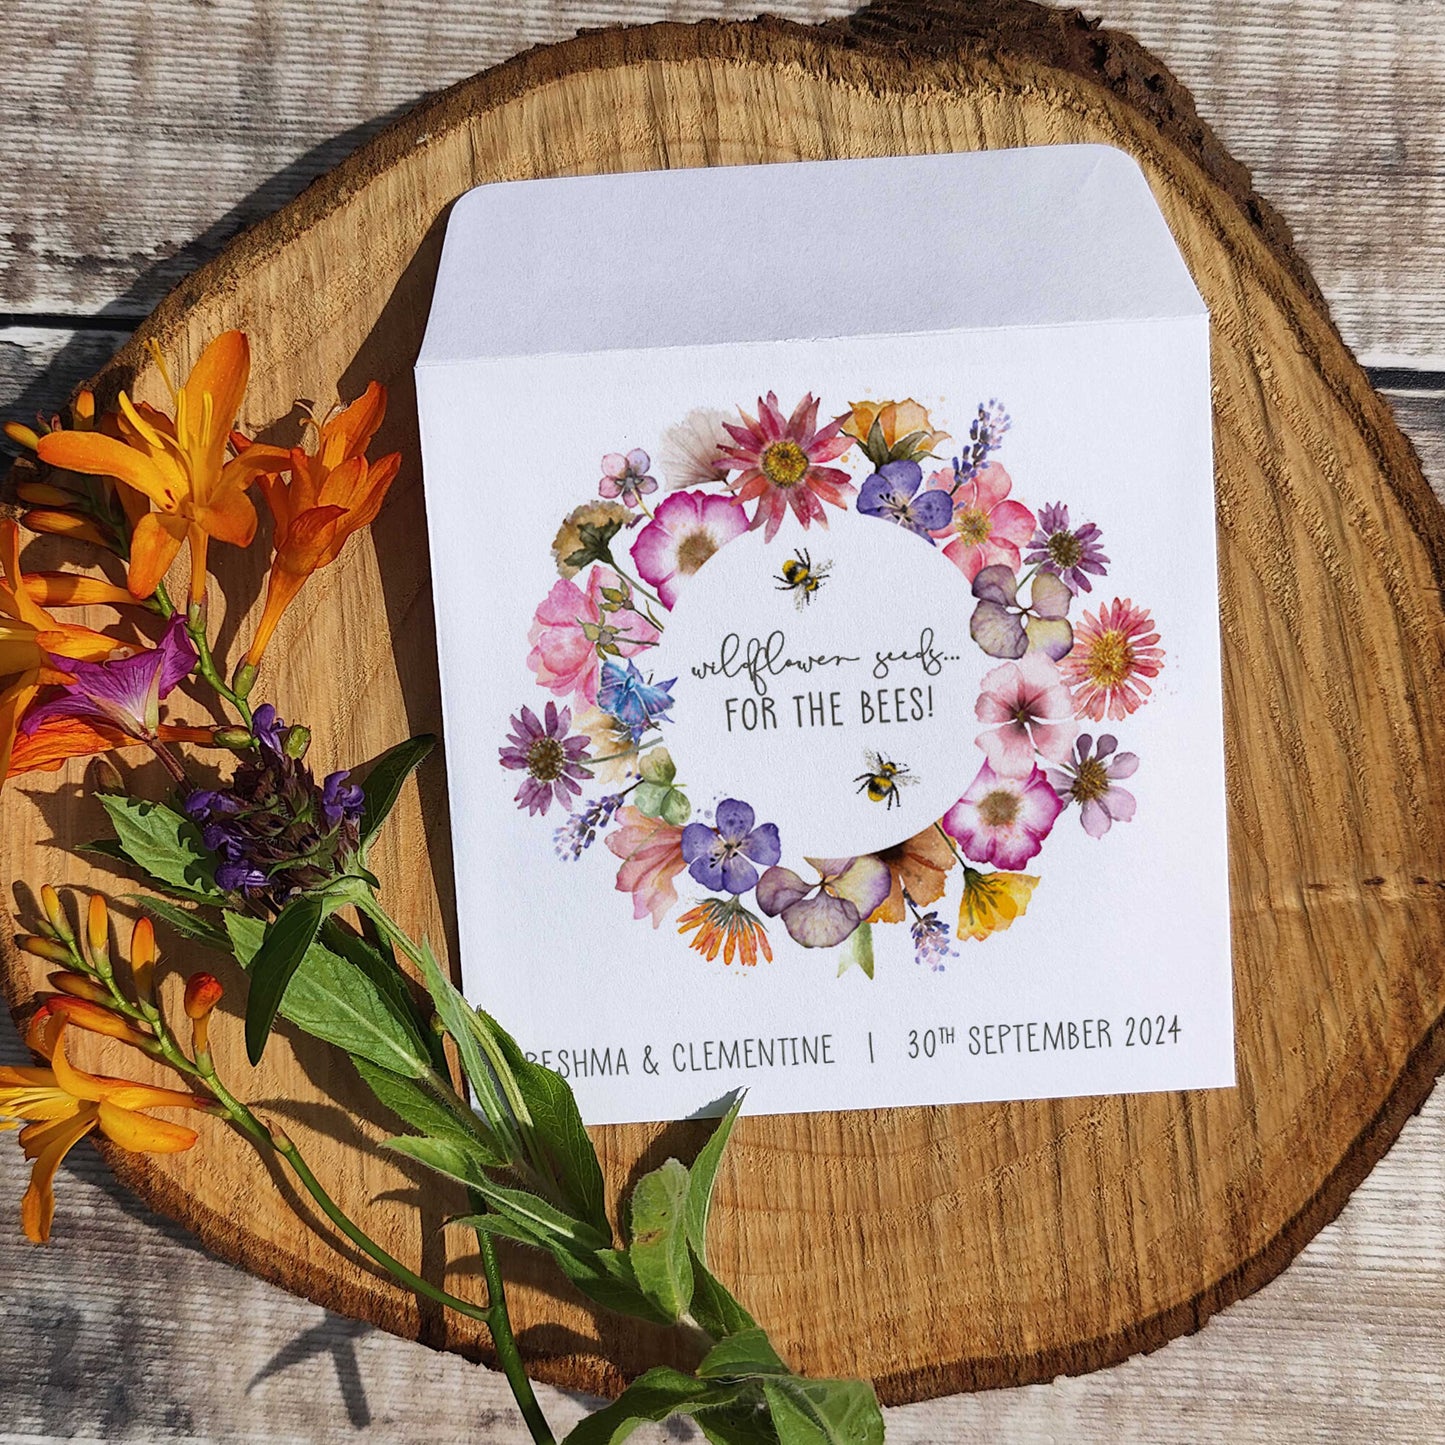 Pressed Flowers Seed Packet Favours (Pack of 10)